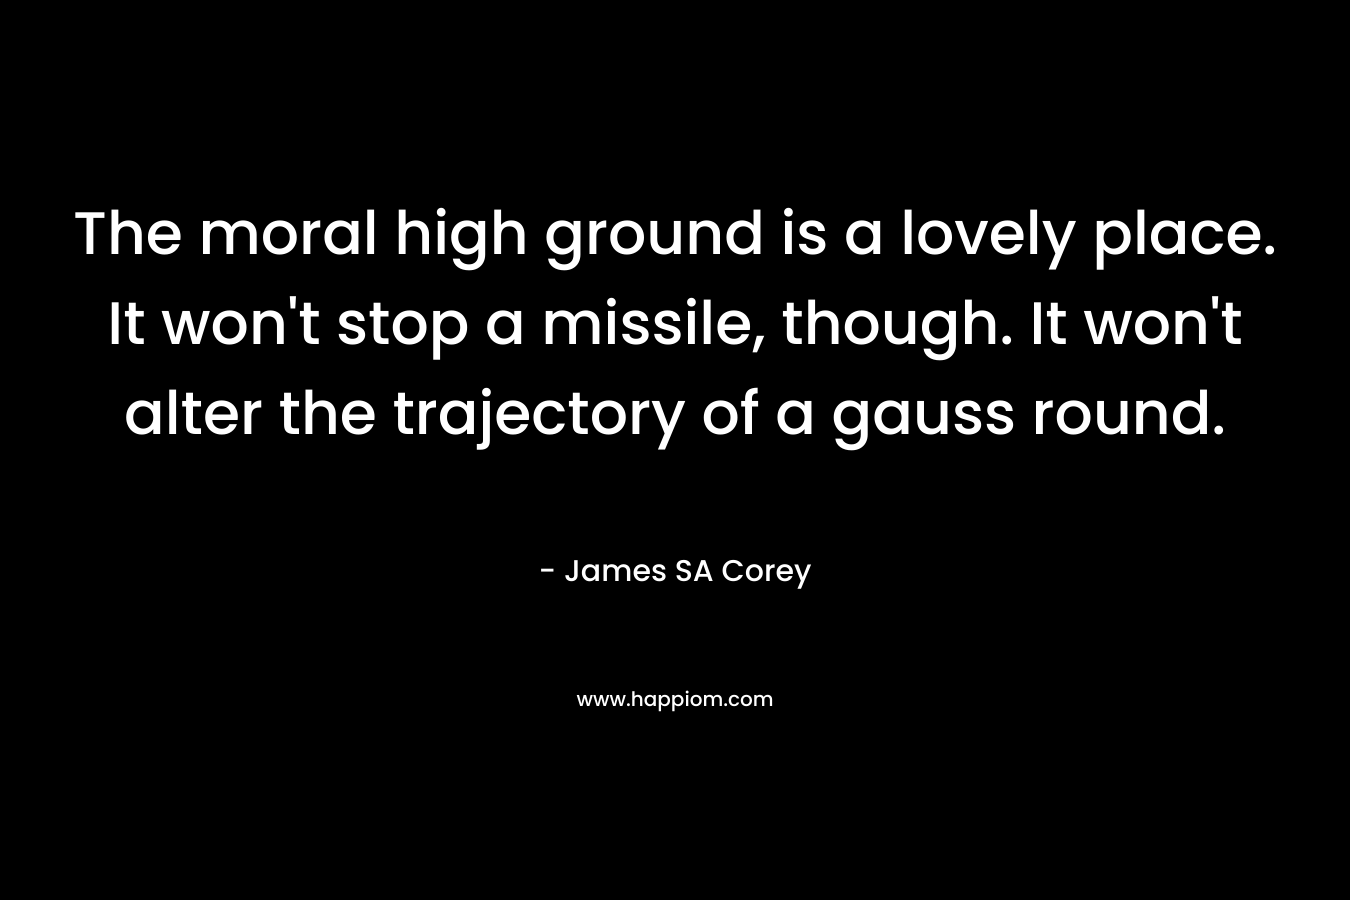 The moral high ground is a lovely place. It won't stop a missile, though. It won't alter the trajectory of a gauss round.